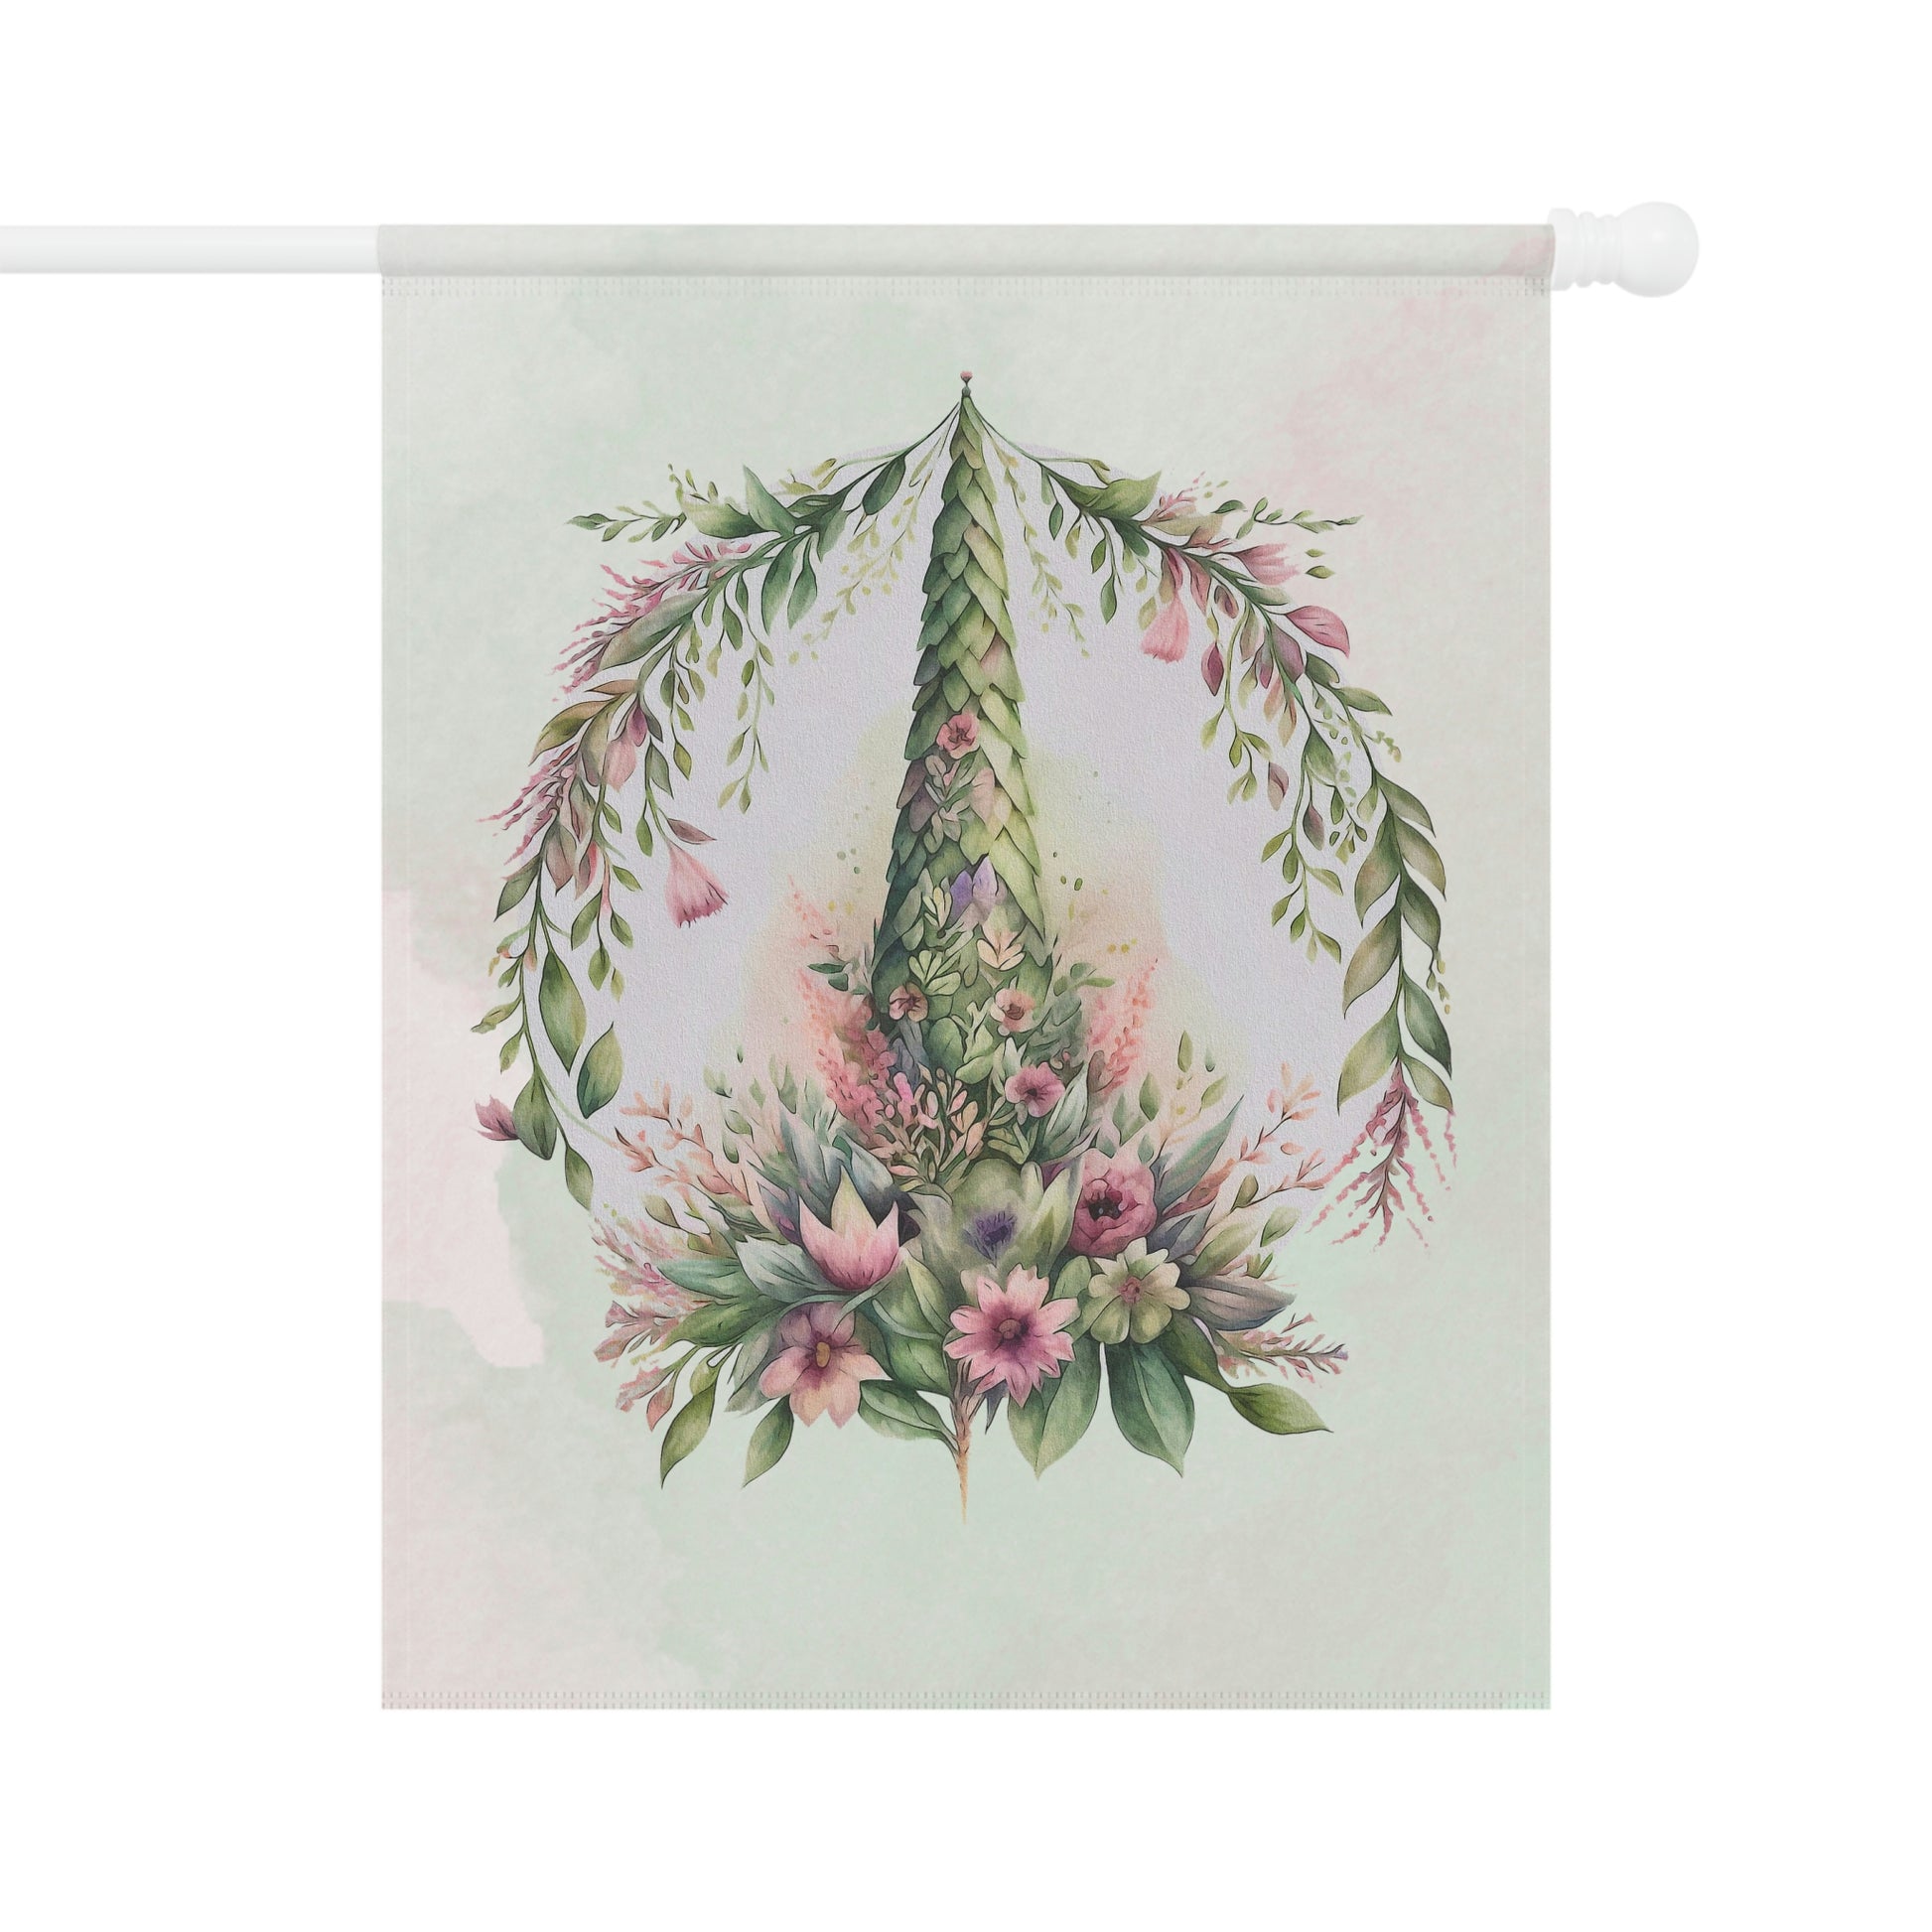 Spring Flower Topiary Watercolor Garden & House Banner